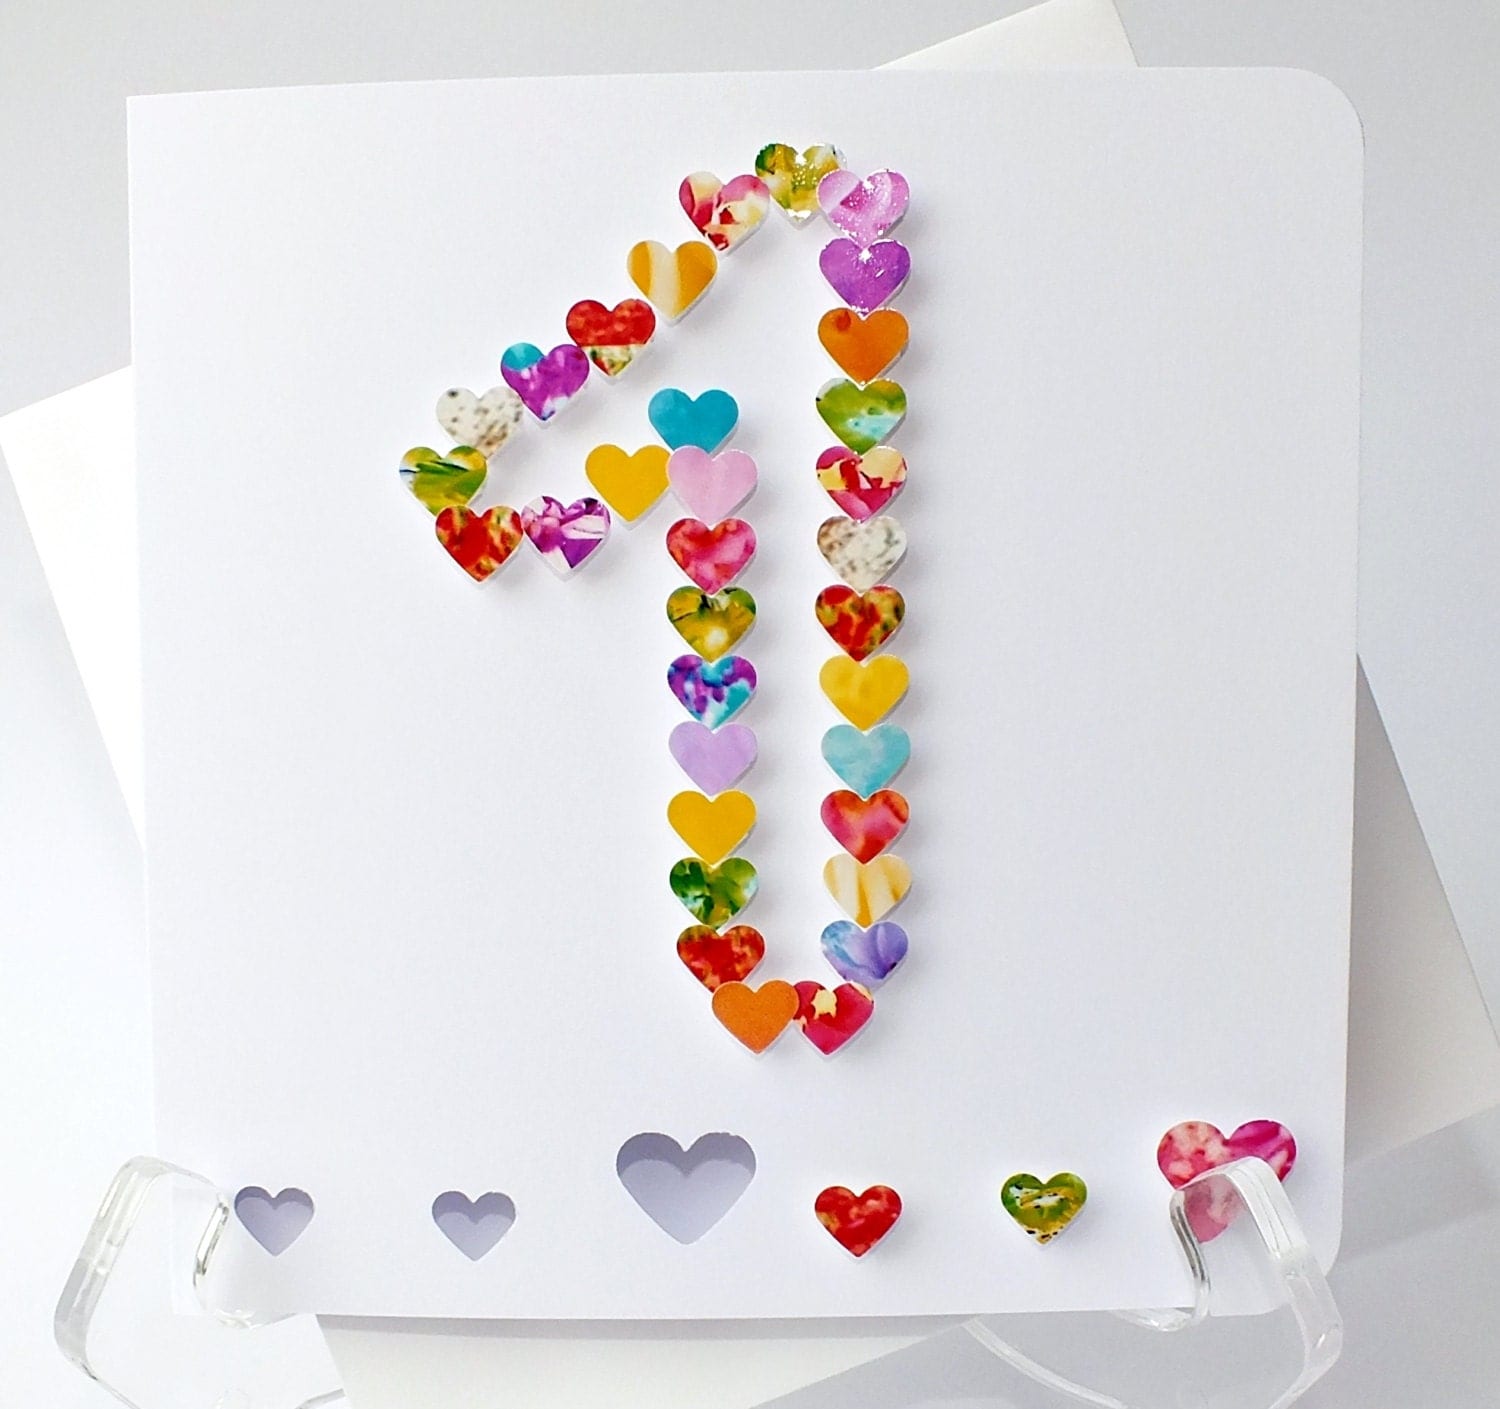 Handmade 3D 1st Birthday Card Personalised / Personalized